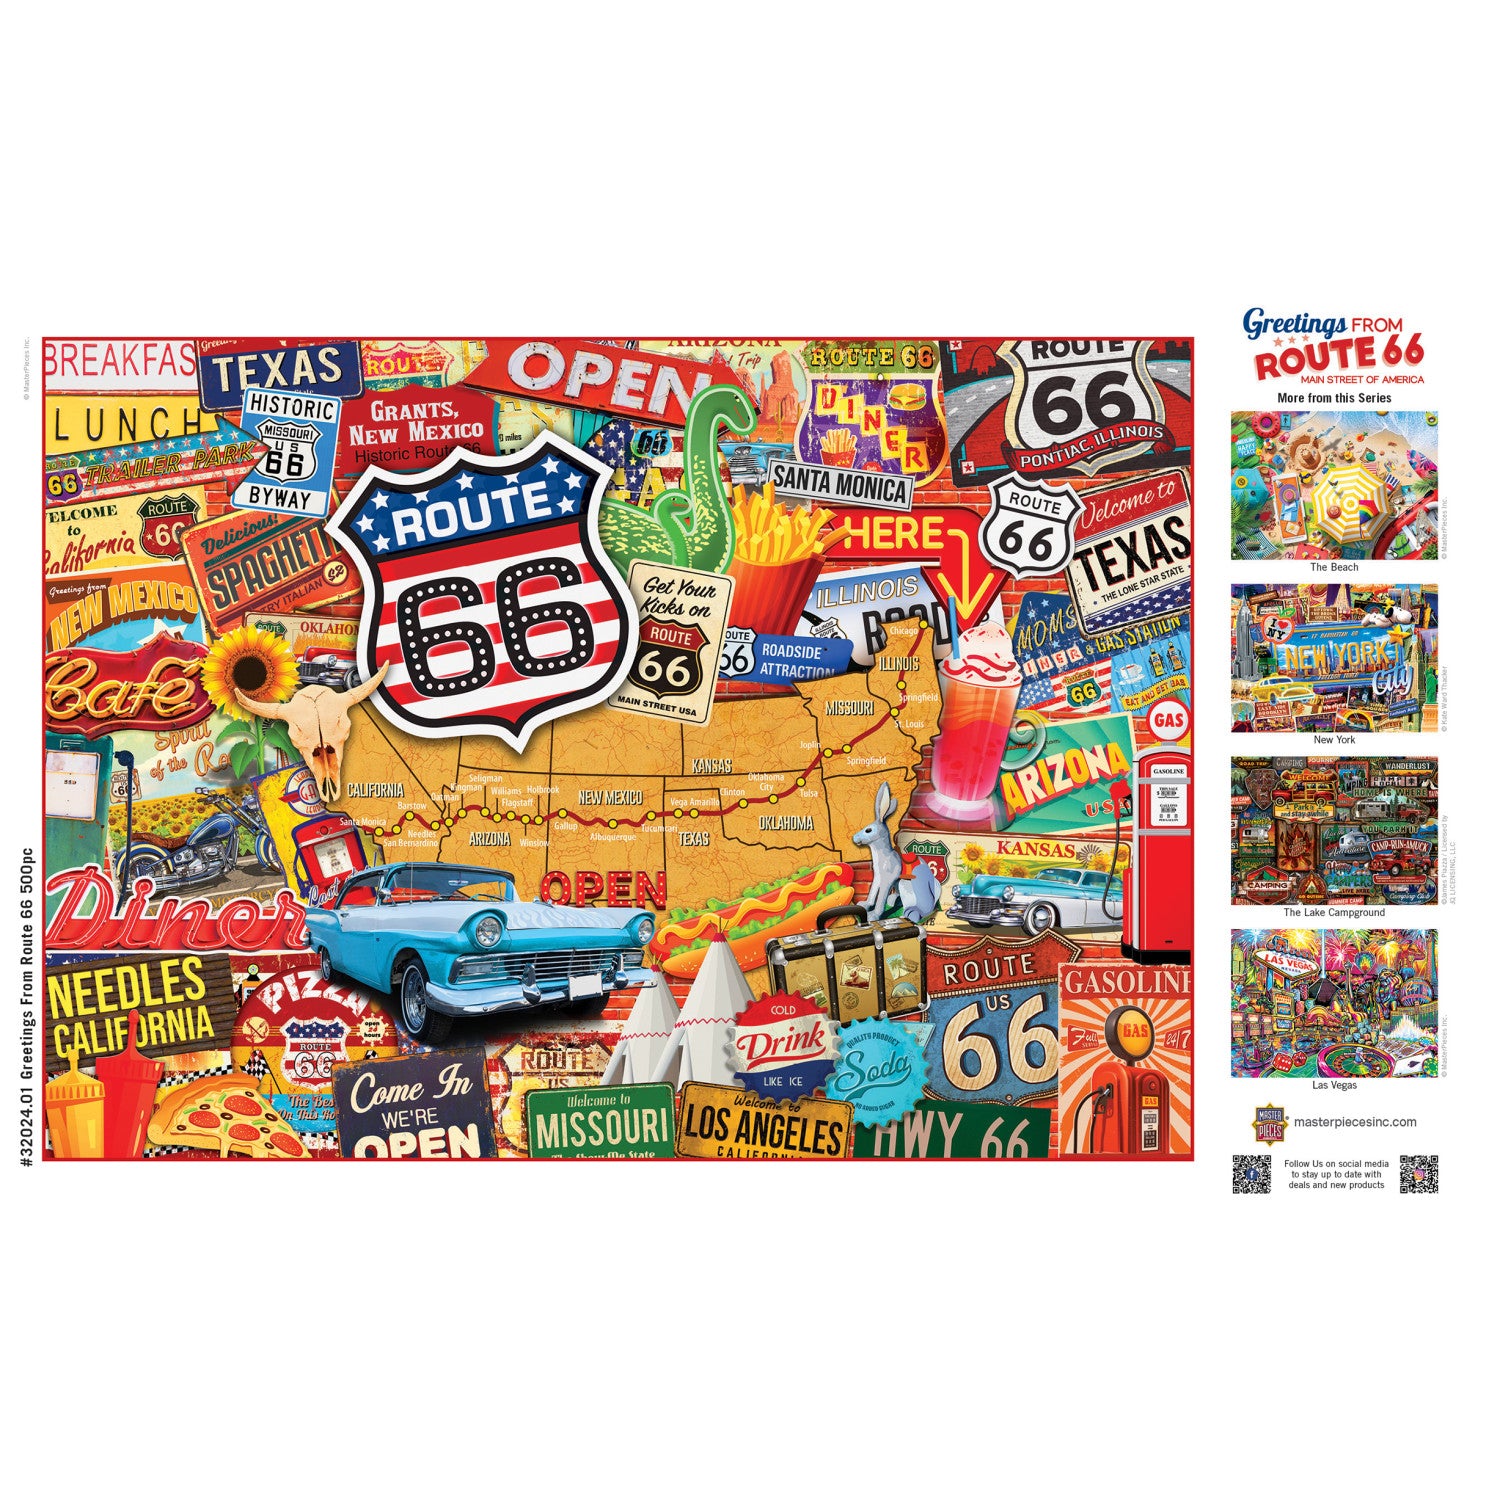 Greetings From Route 66 - 500 Piece Jigsaw Puzzle